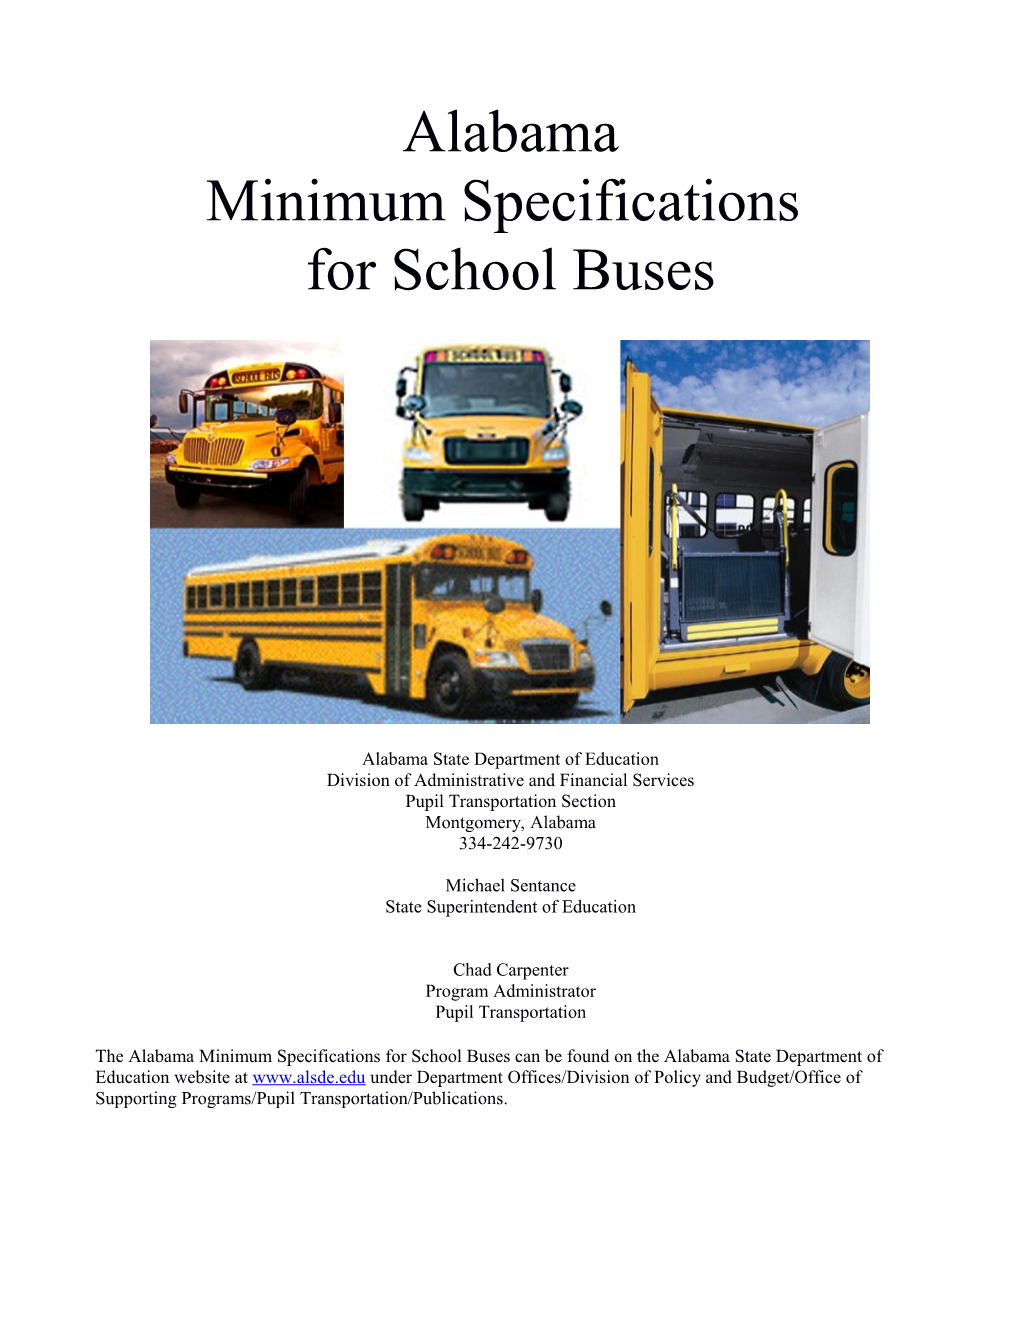 Alabama Minimum Specifications for School Buses